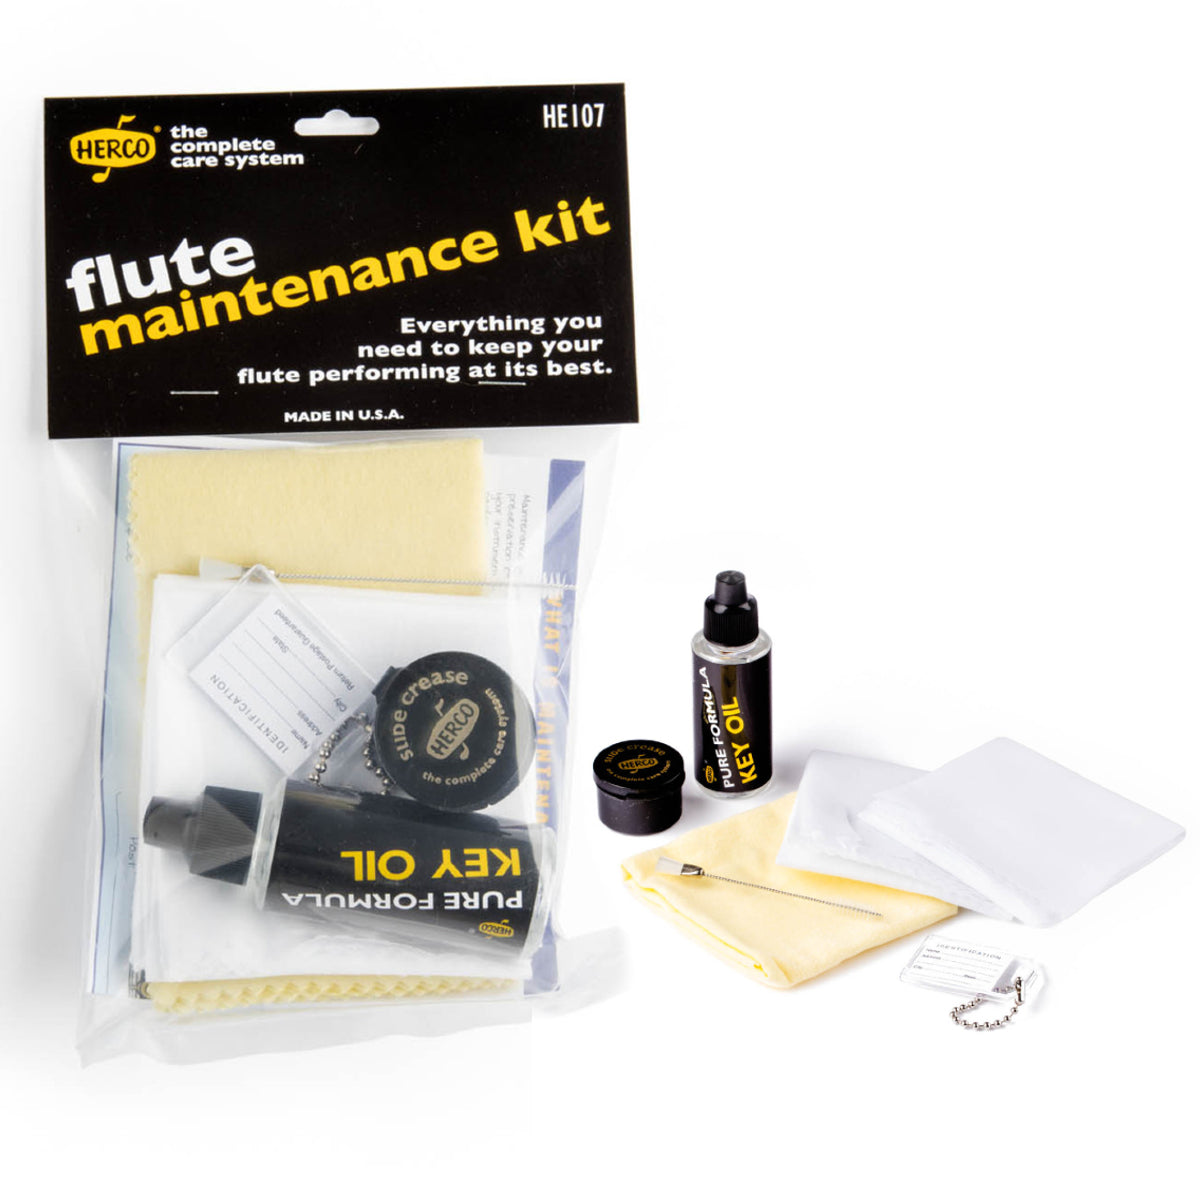 Herco Flute Maintenance Kit HE107 package in/out of package